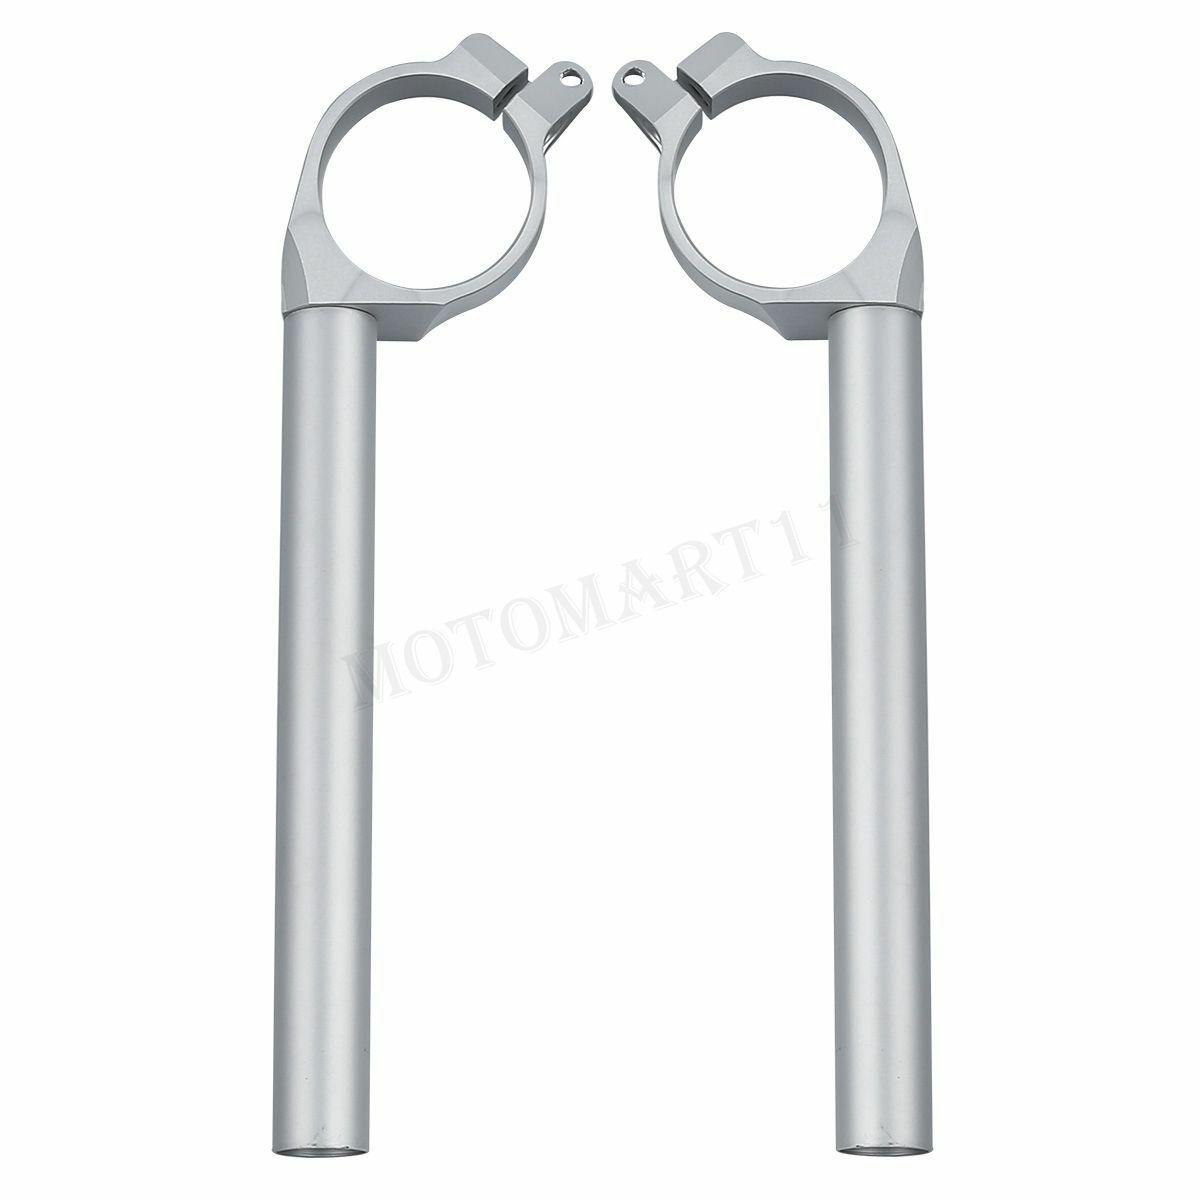 Fit For YAMAHA YZF R6 YZFR6 2006-2016 Silver Clip on Clipons Handle Bars - Moto Life Products